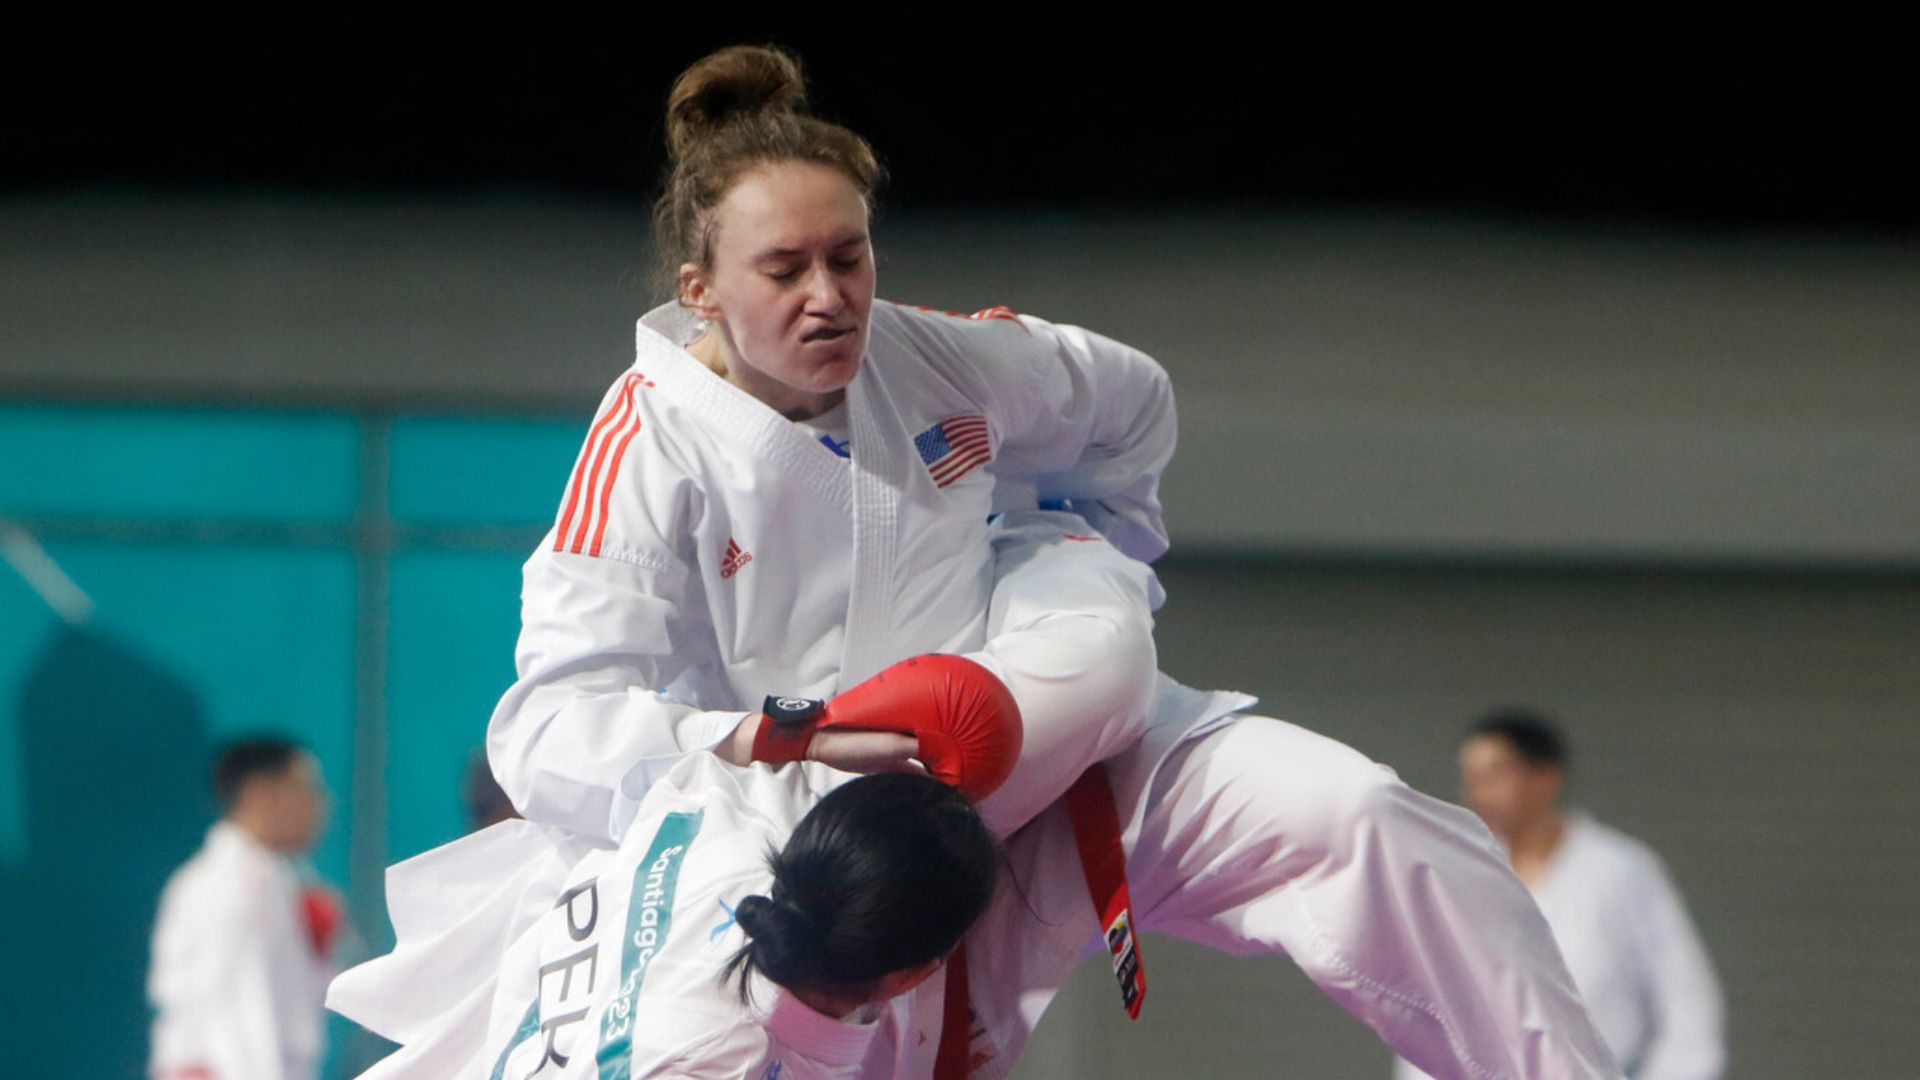 American Skylar Lingl Responds to Favoritism and Aims for Gold in Karate